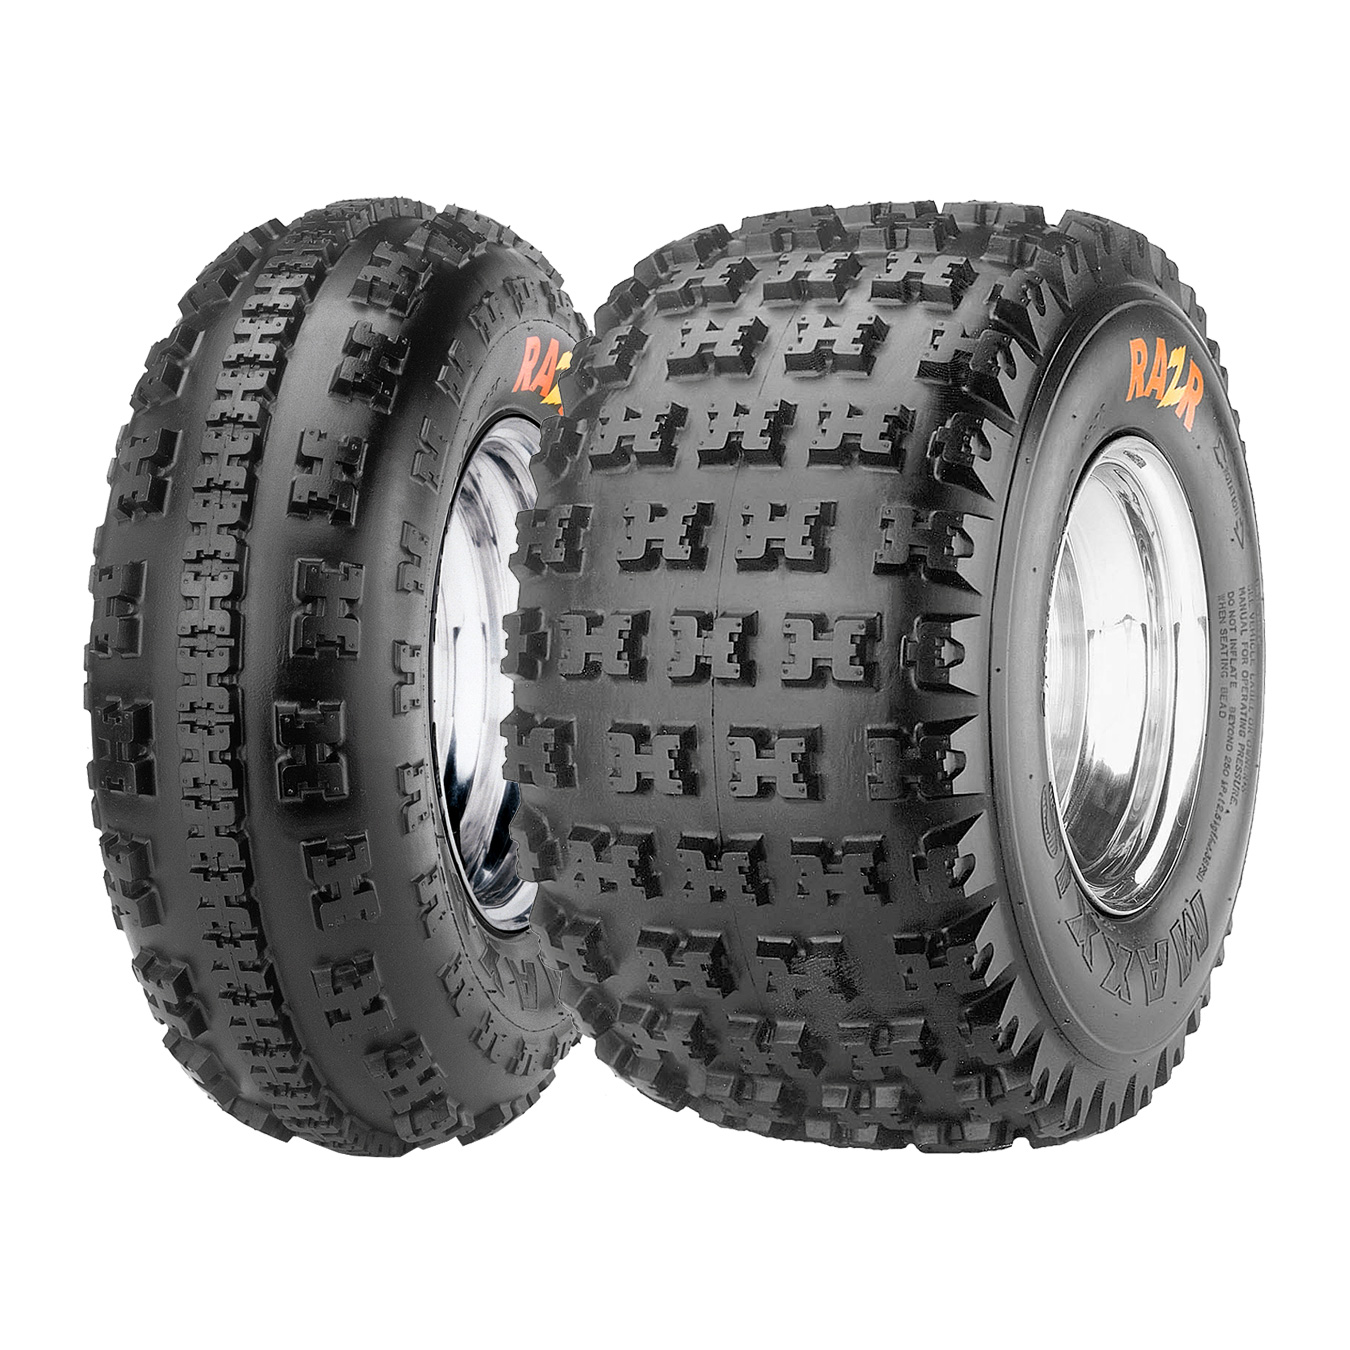 Maxxis TM16030000 M931 Razr Front Tire - 22x7-10 For XC and Off-Road Racing